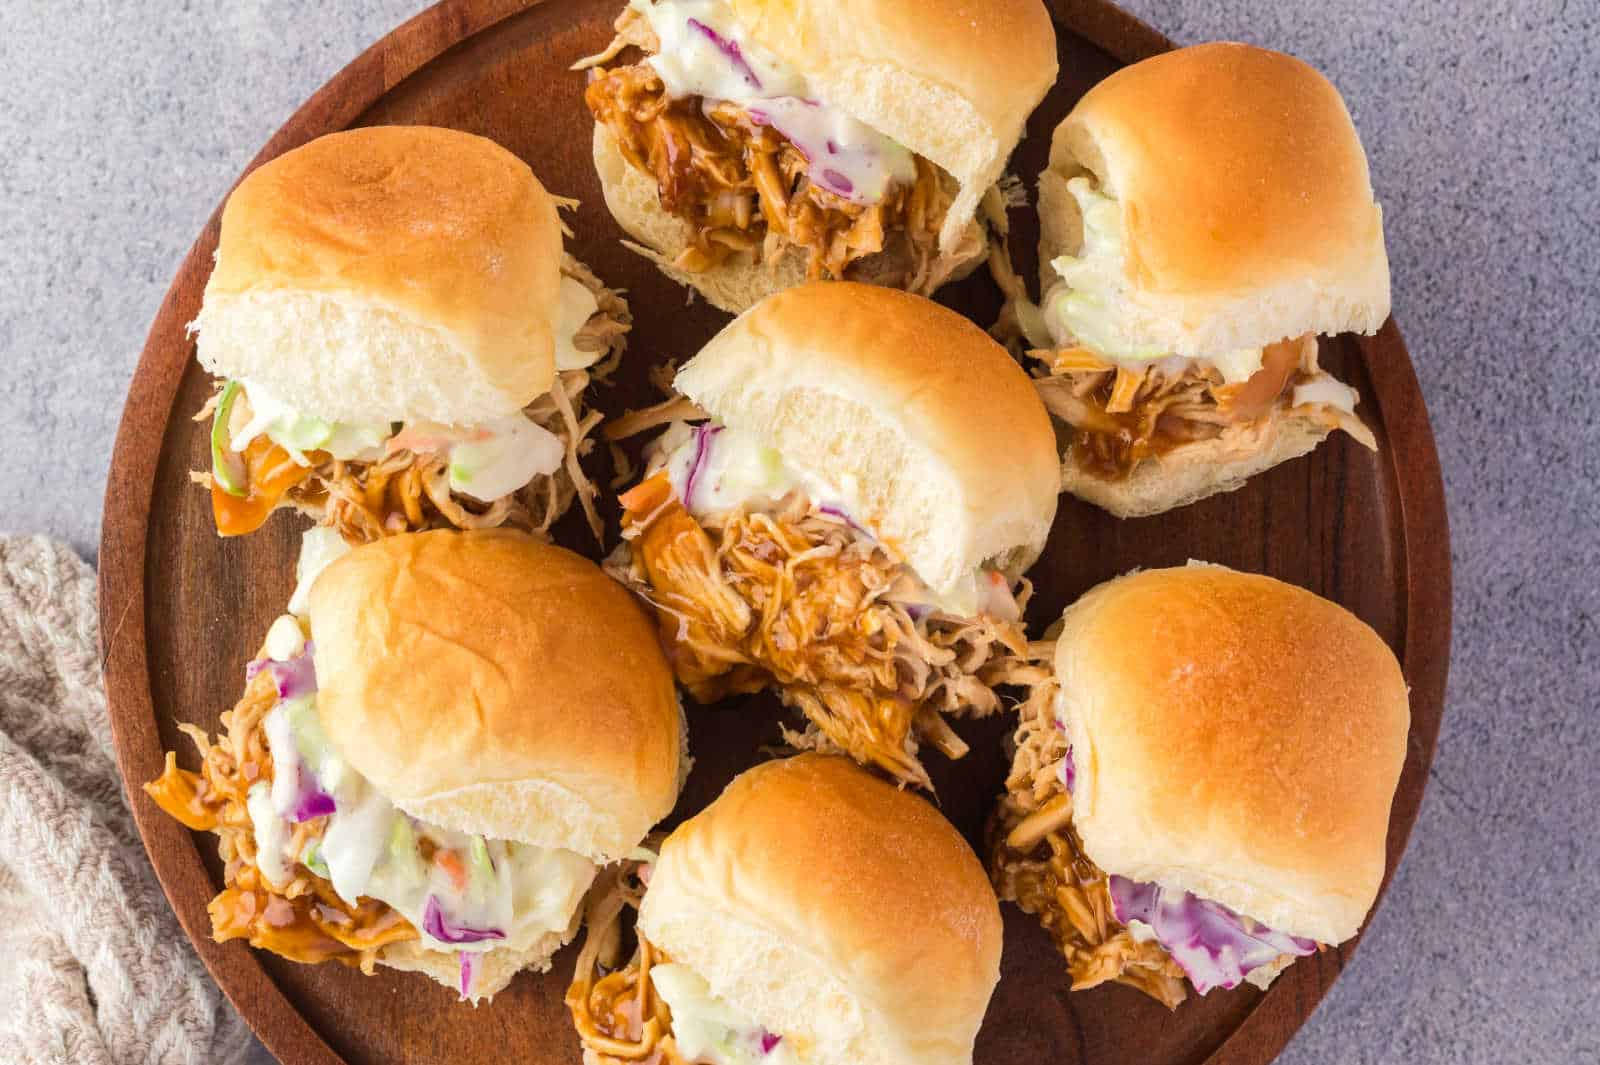 A wooden plate holds six sliders filled with shredded chicken and coleslaw, arranged neatly on a surface.